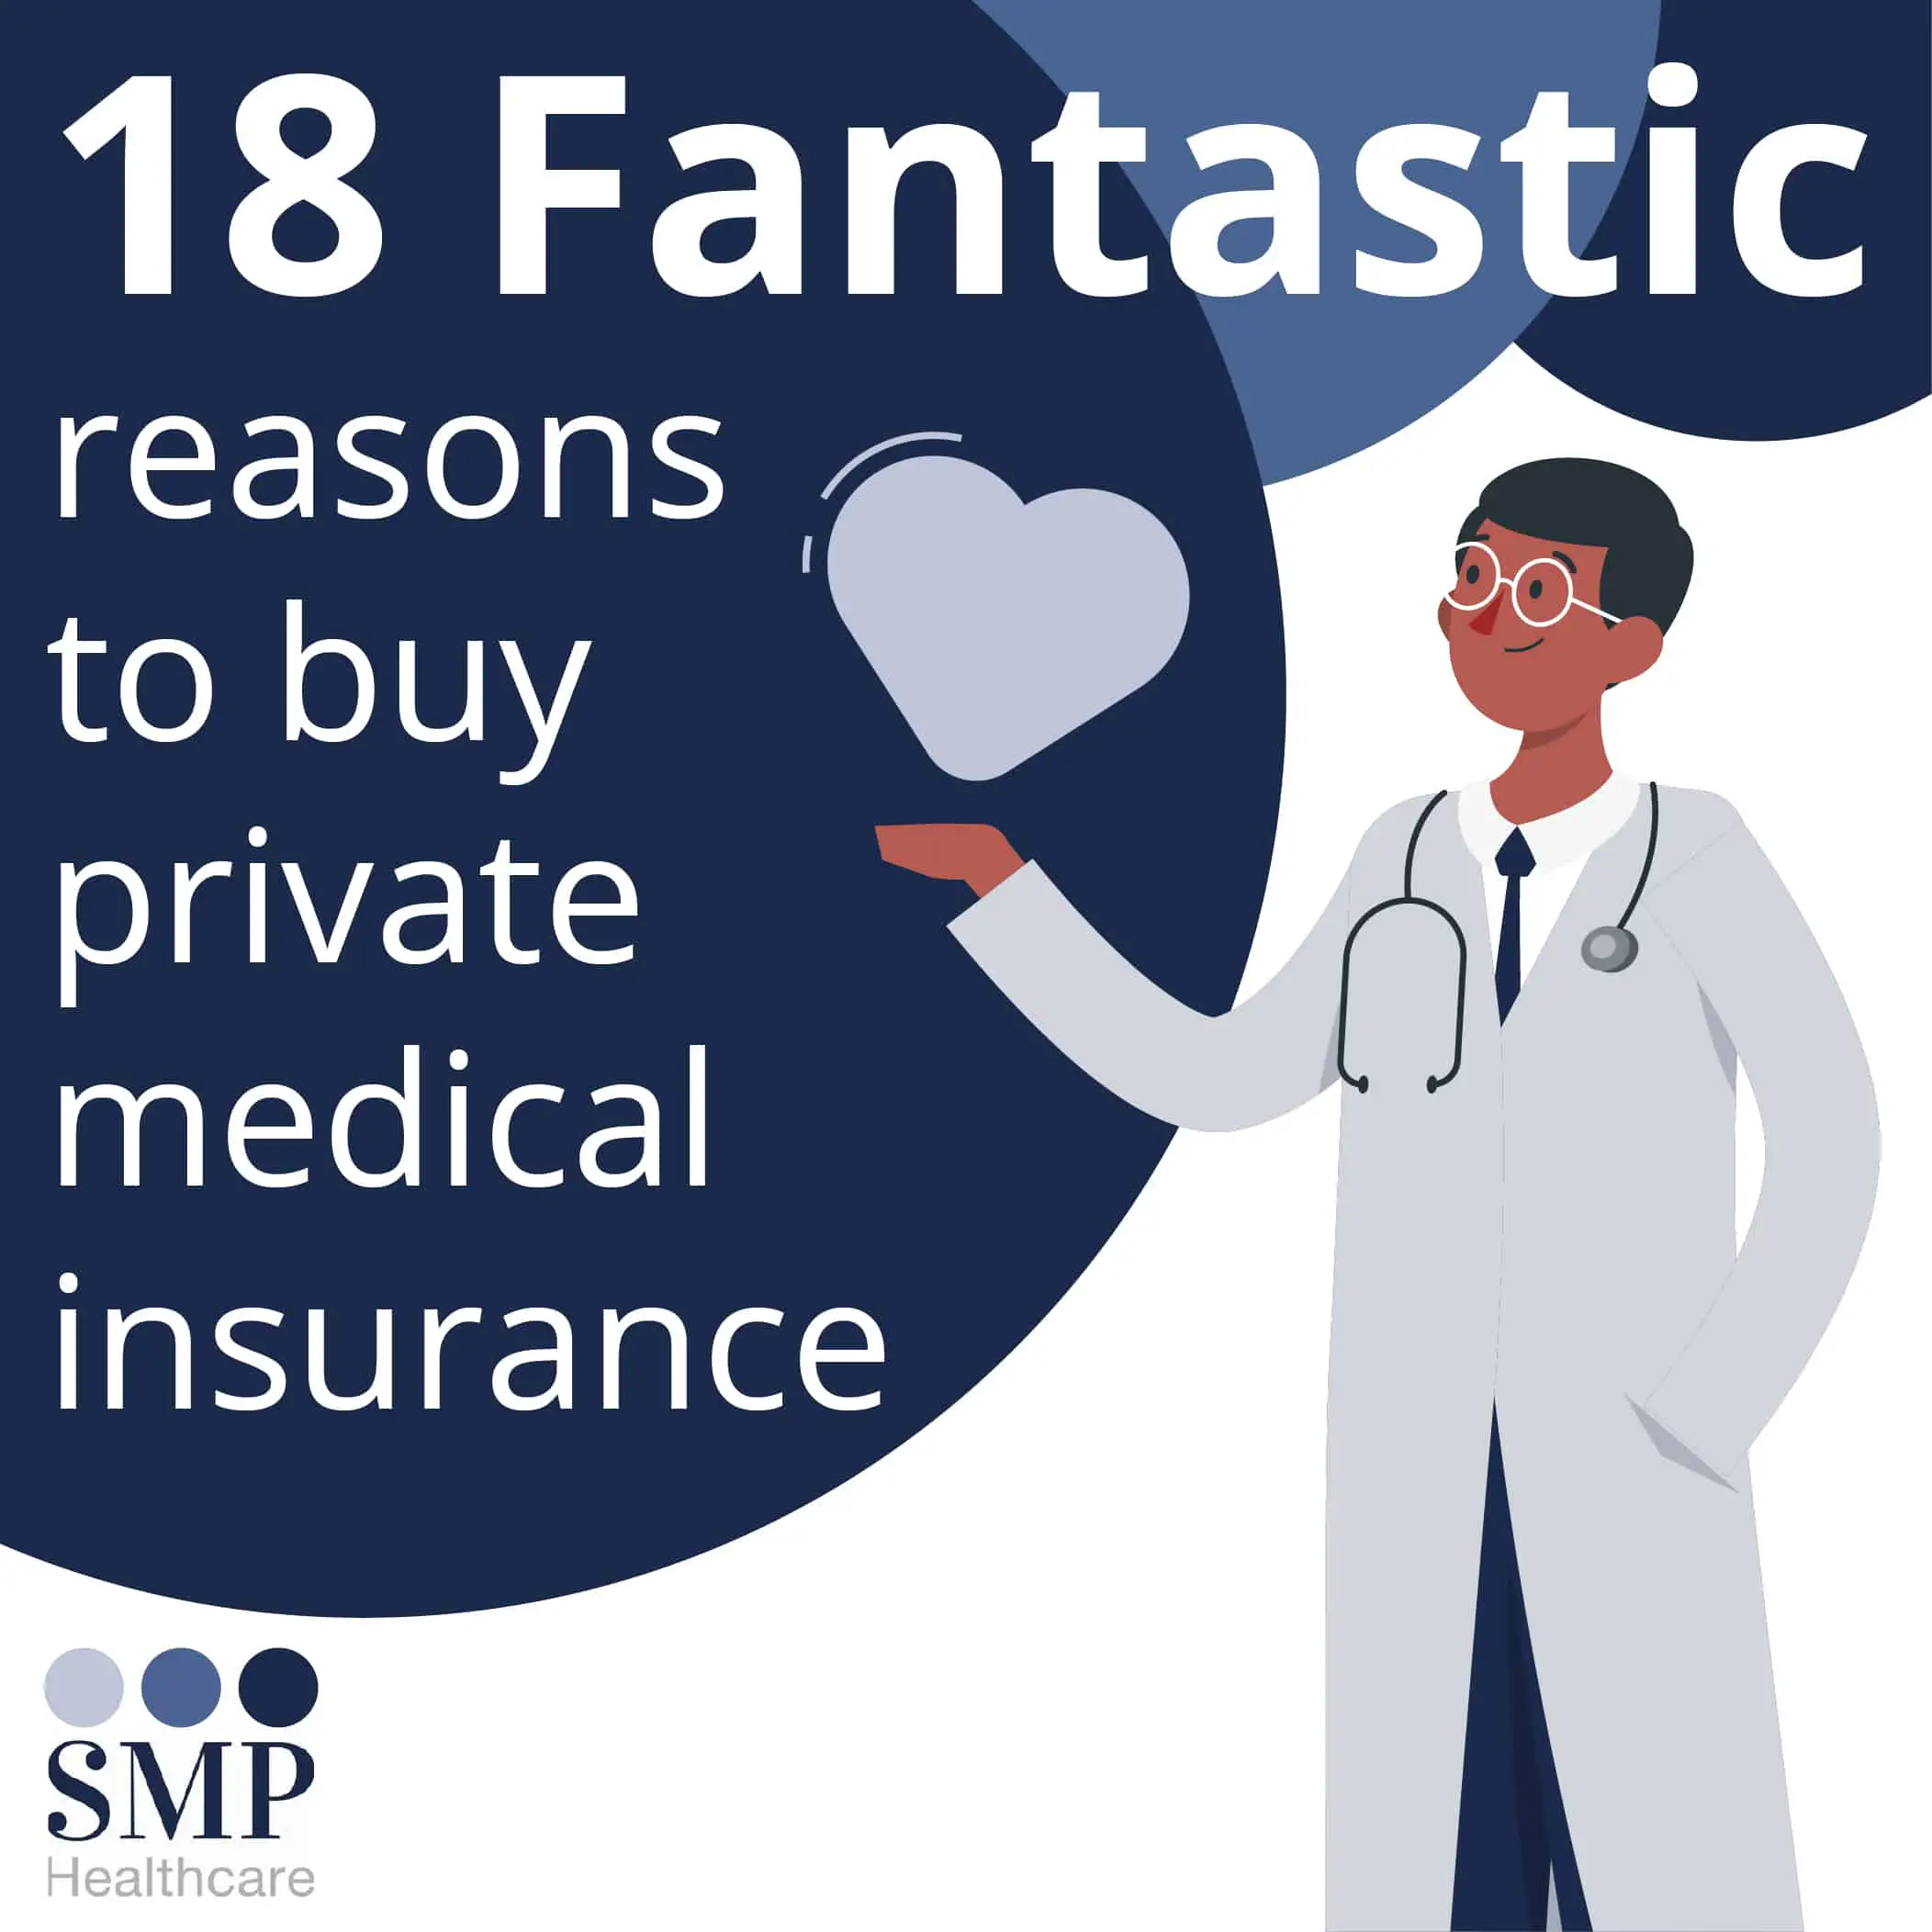 Private medical insurance  18 fantastic reasons to buy it